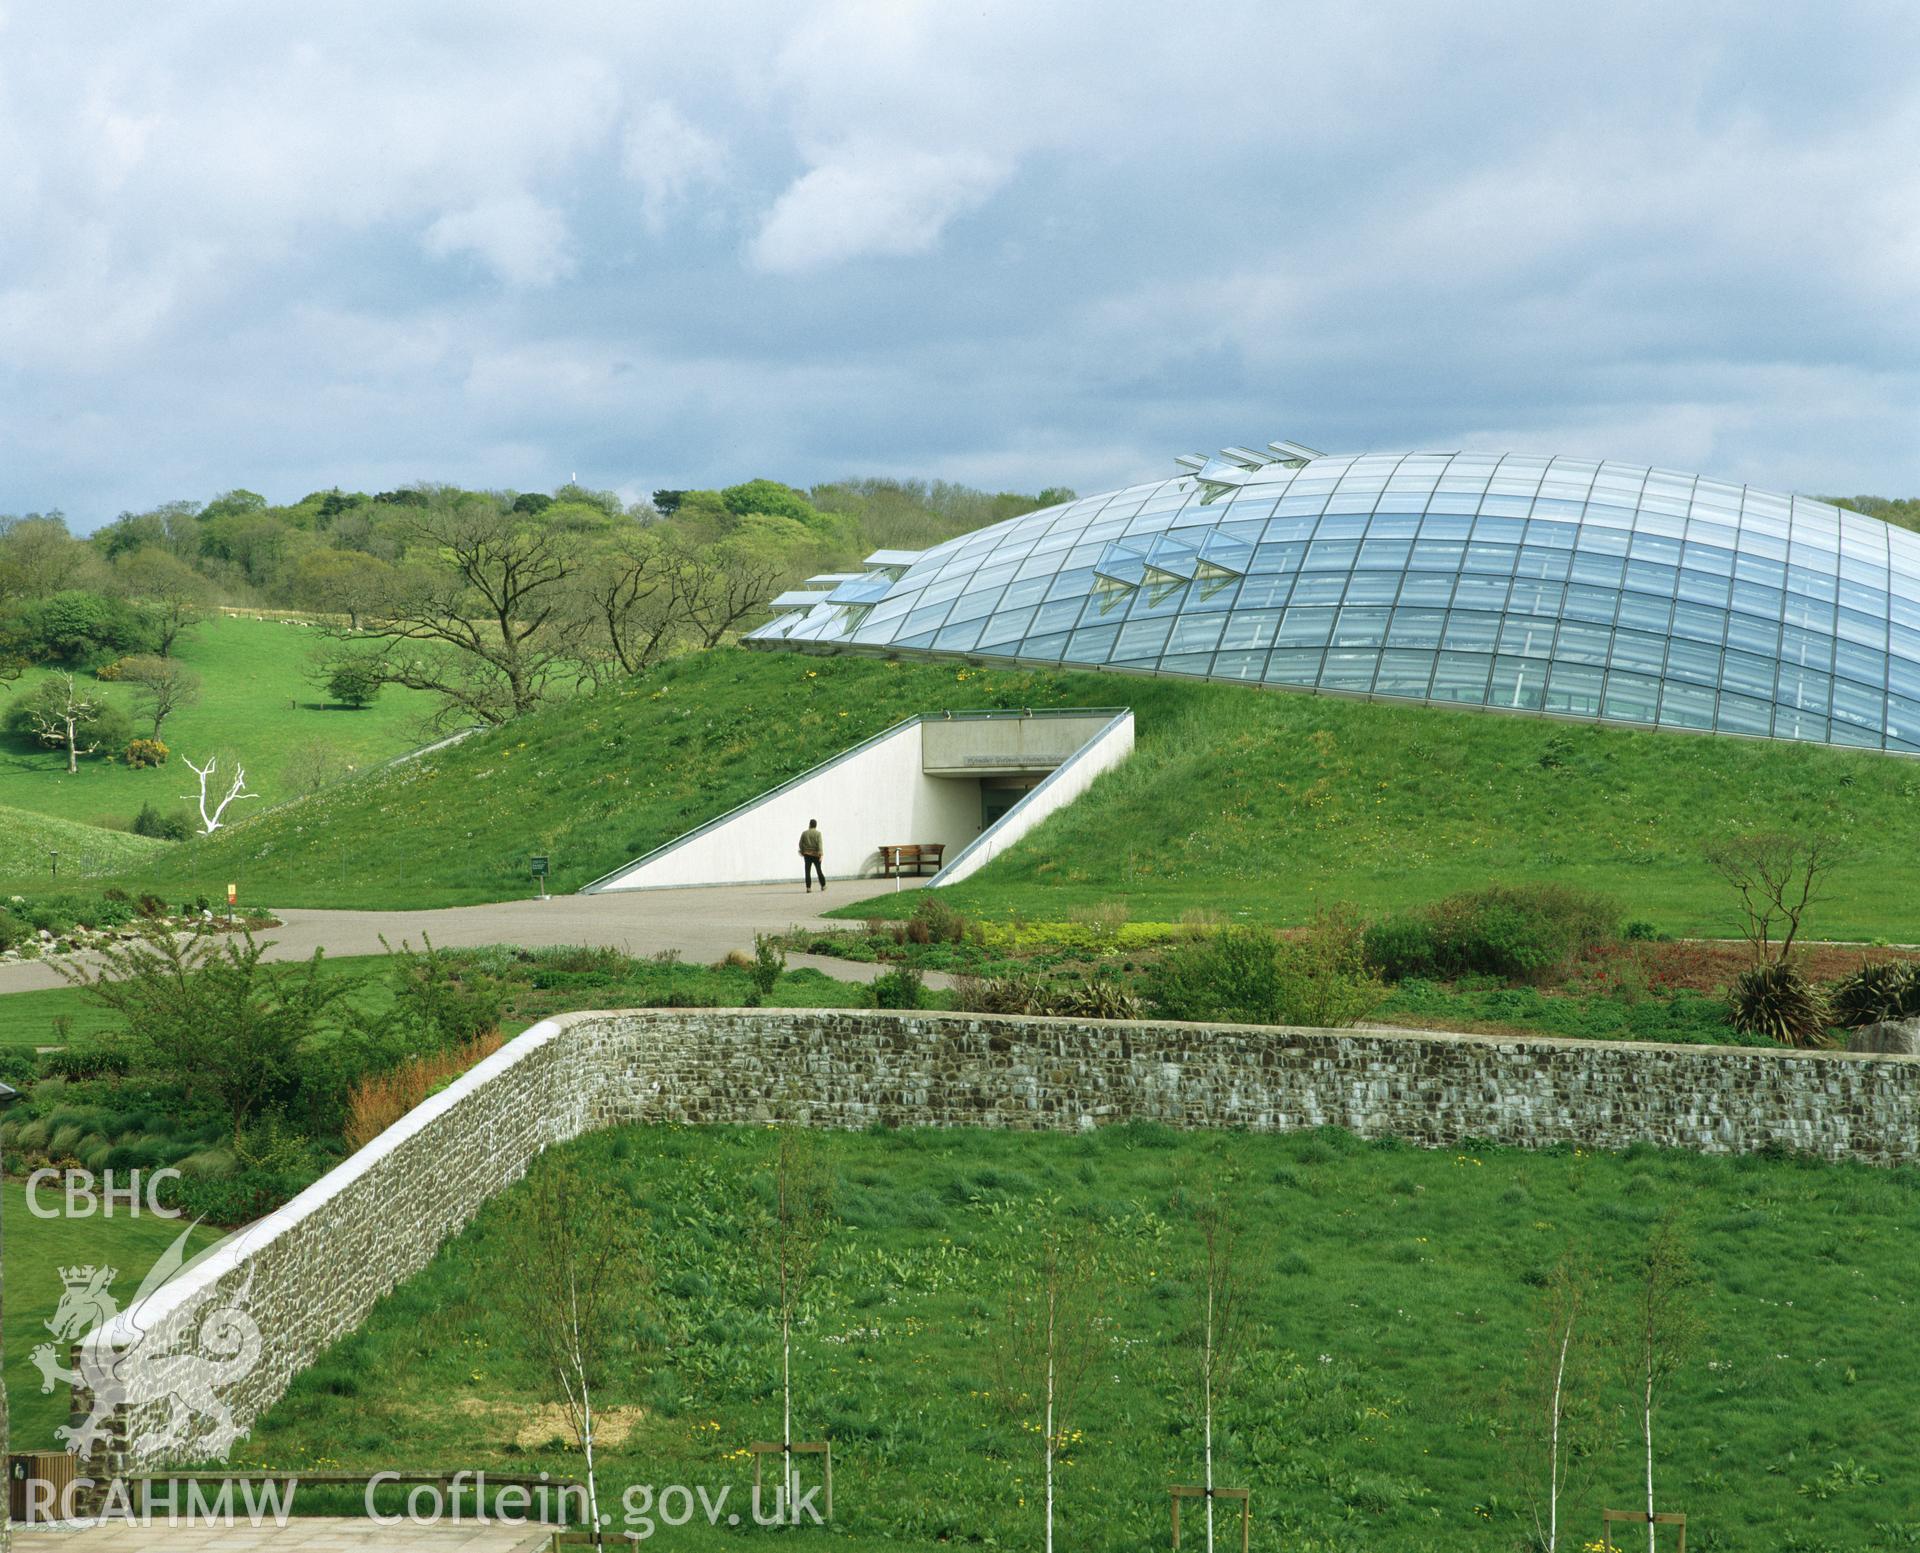 Colour transparency showing the glasshouse at the National Botanic Gardens, Llanrthne, produced by Iain Wright, June 2004